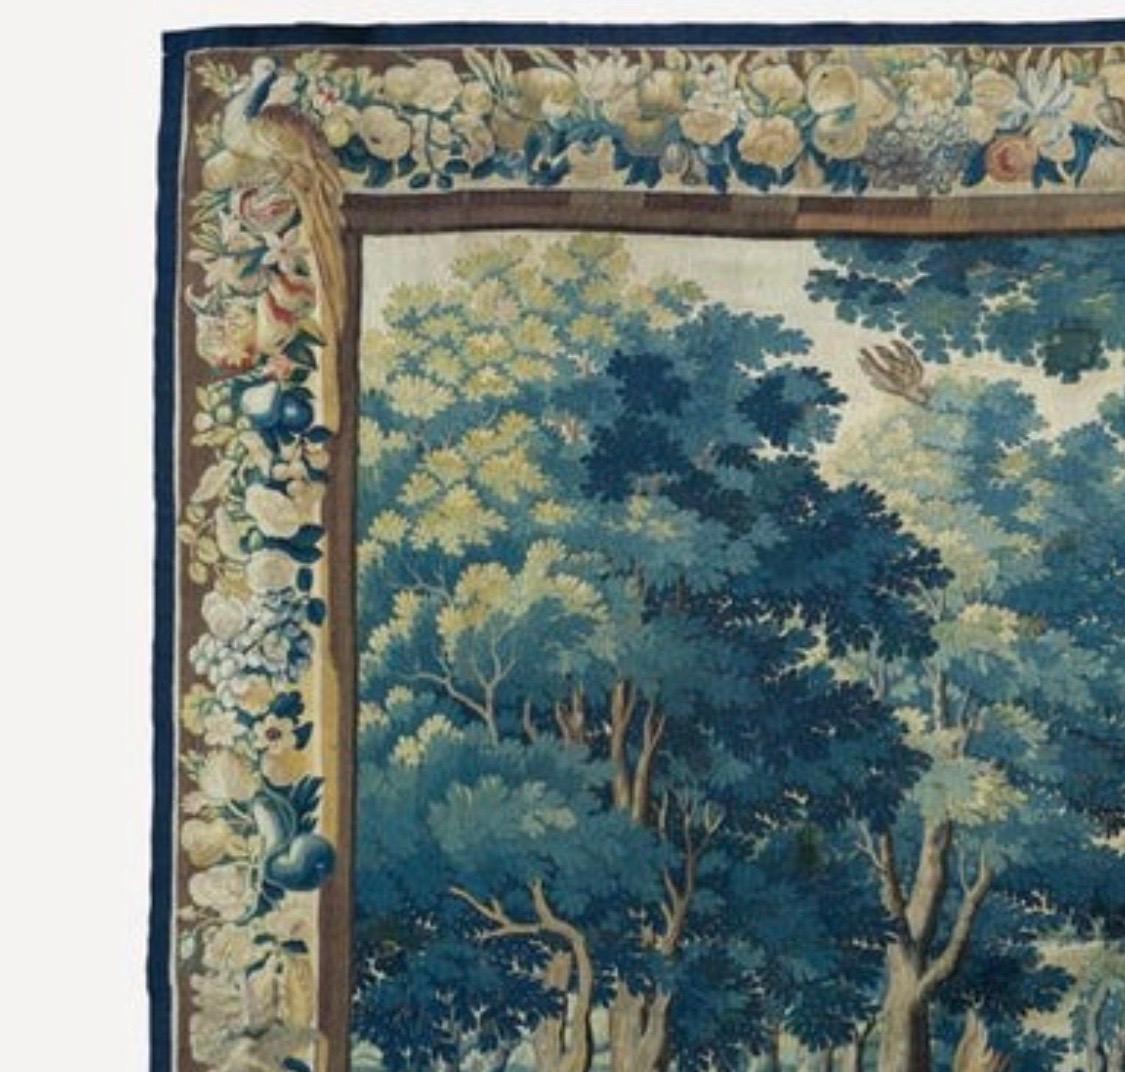 This is a gorgeous antique 17th century Flemish verdure landscape tapestry depicting a beautiful and rich summer scene of a countryside with lush trees and vegetation, with two figures in the foreground. The border features several different